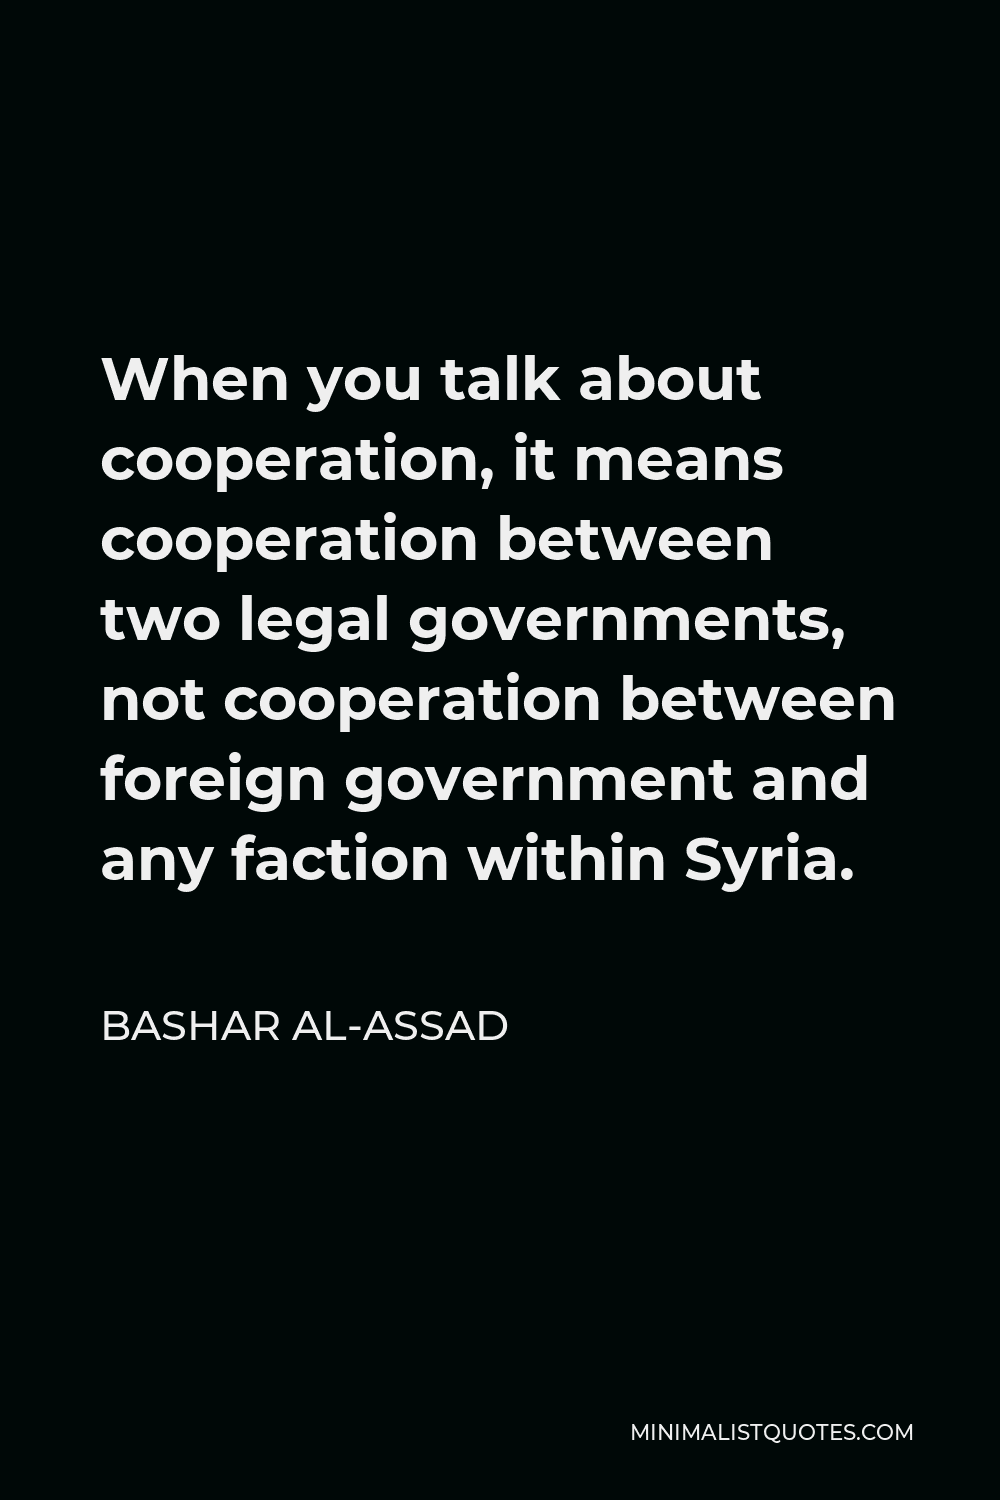 Bashar al-Assad Quote - When you talk about cooperation, it means cooperation between two legal governments, not cooperation between foreign government and any faction within Syria.